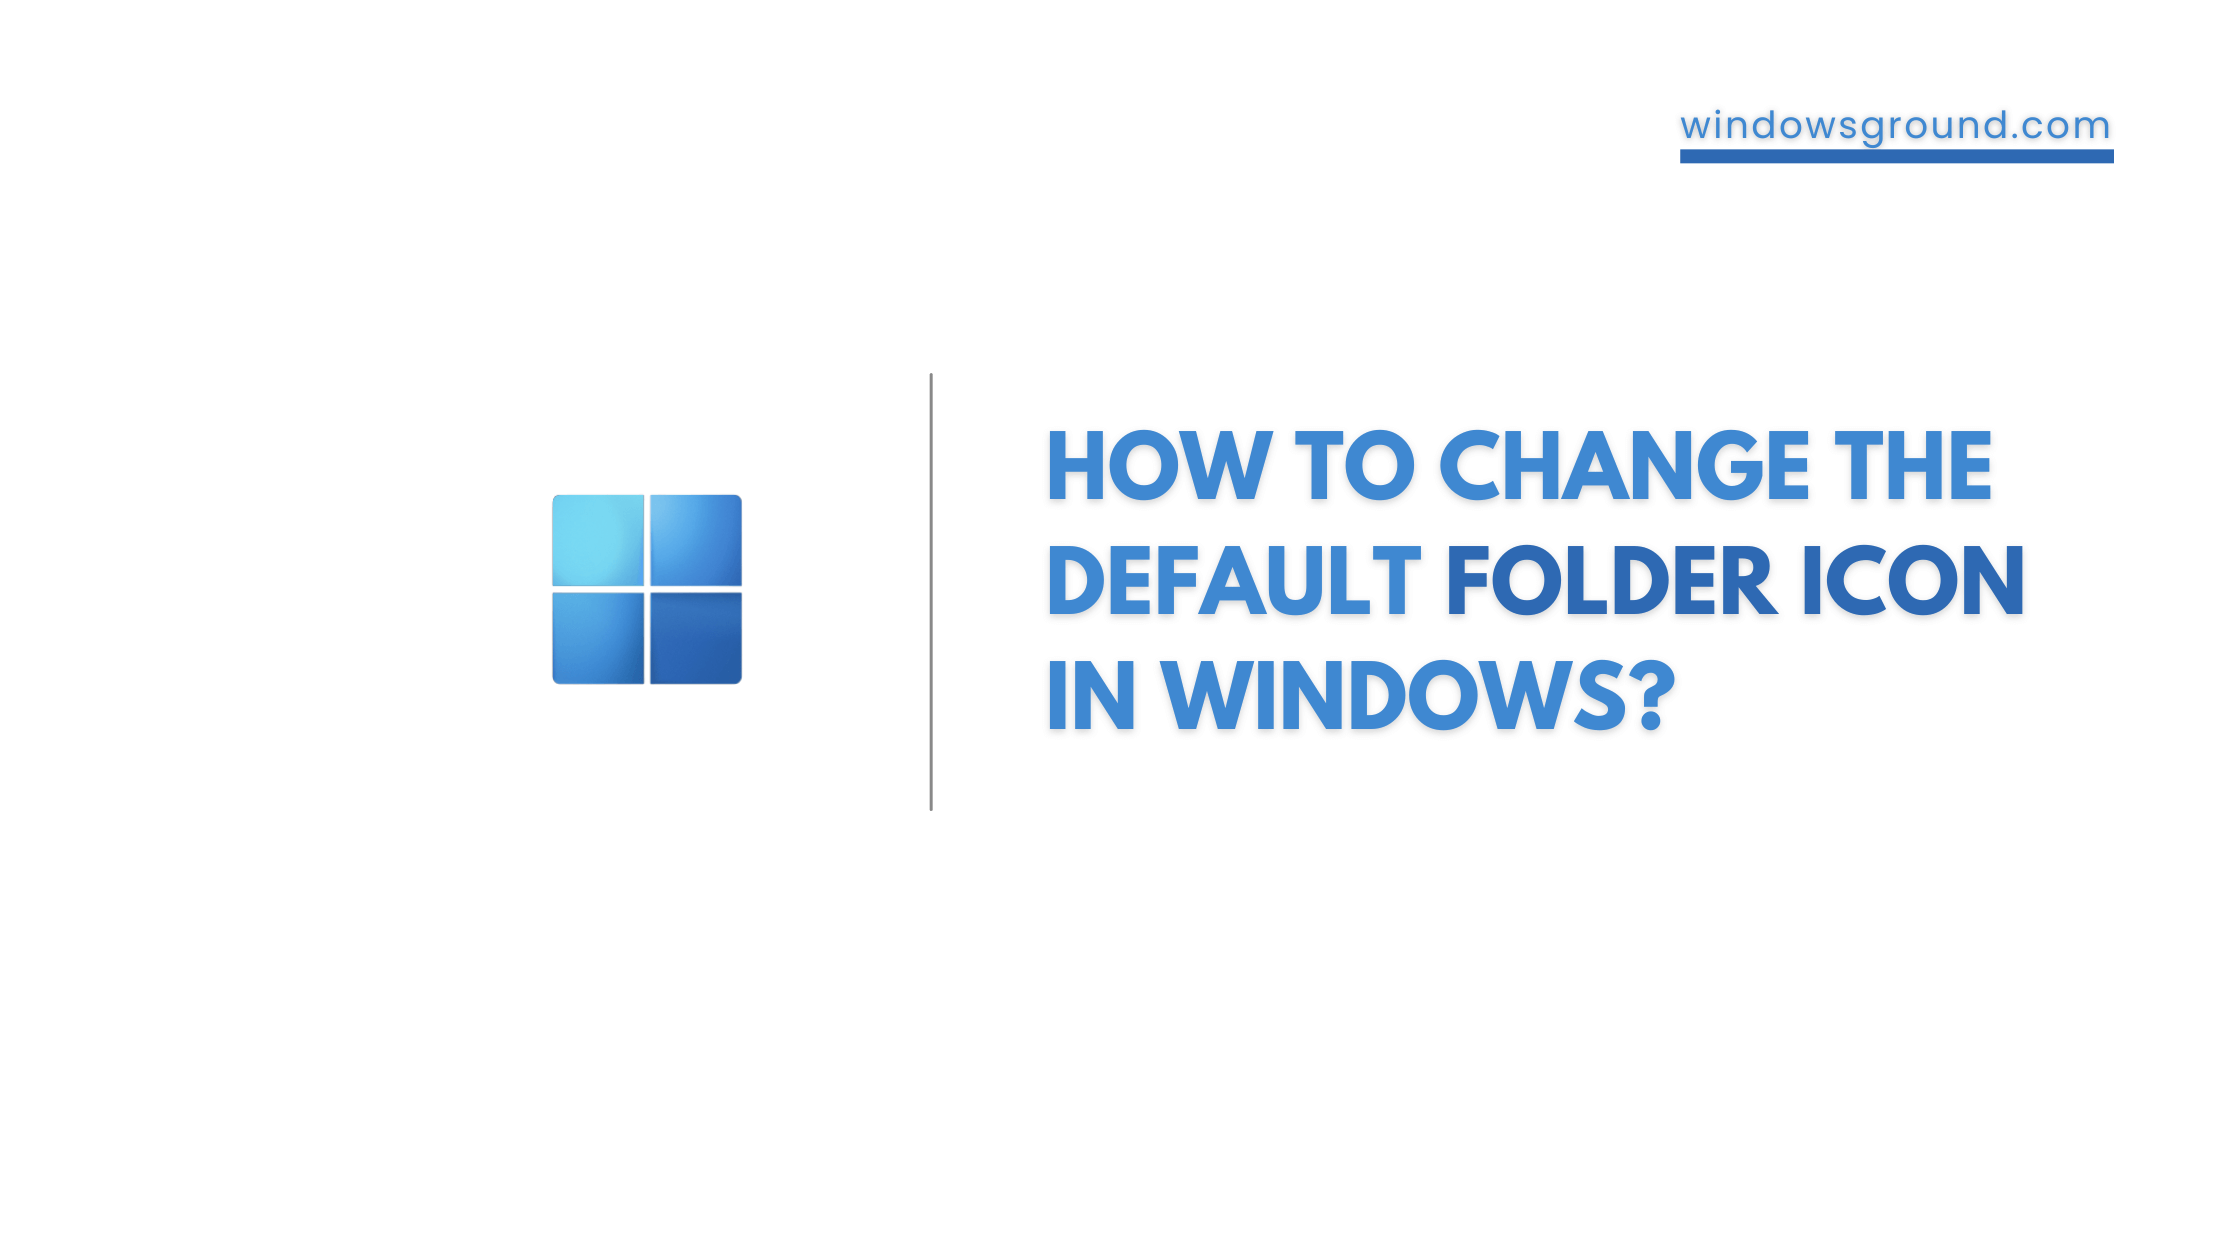 How To Change The Default Folder Icon In Windows